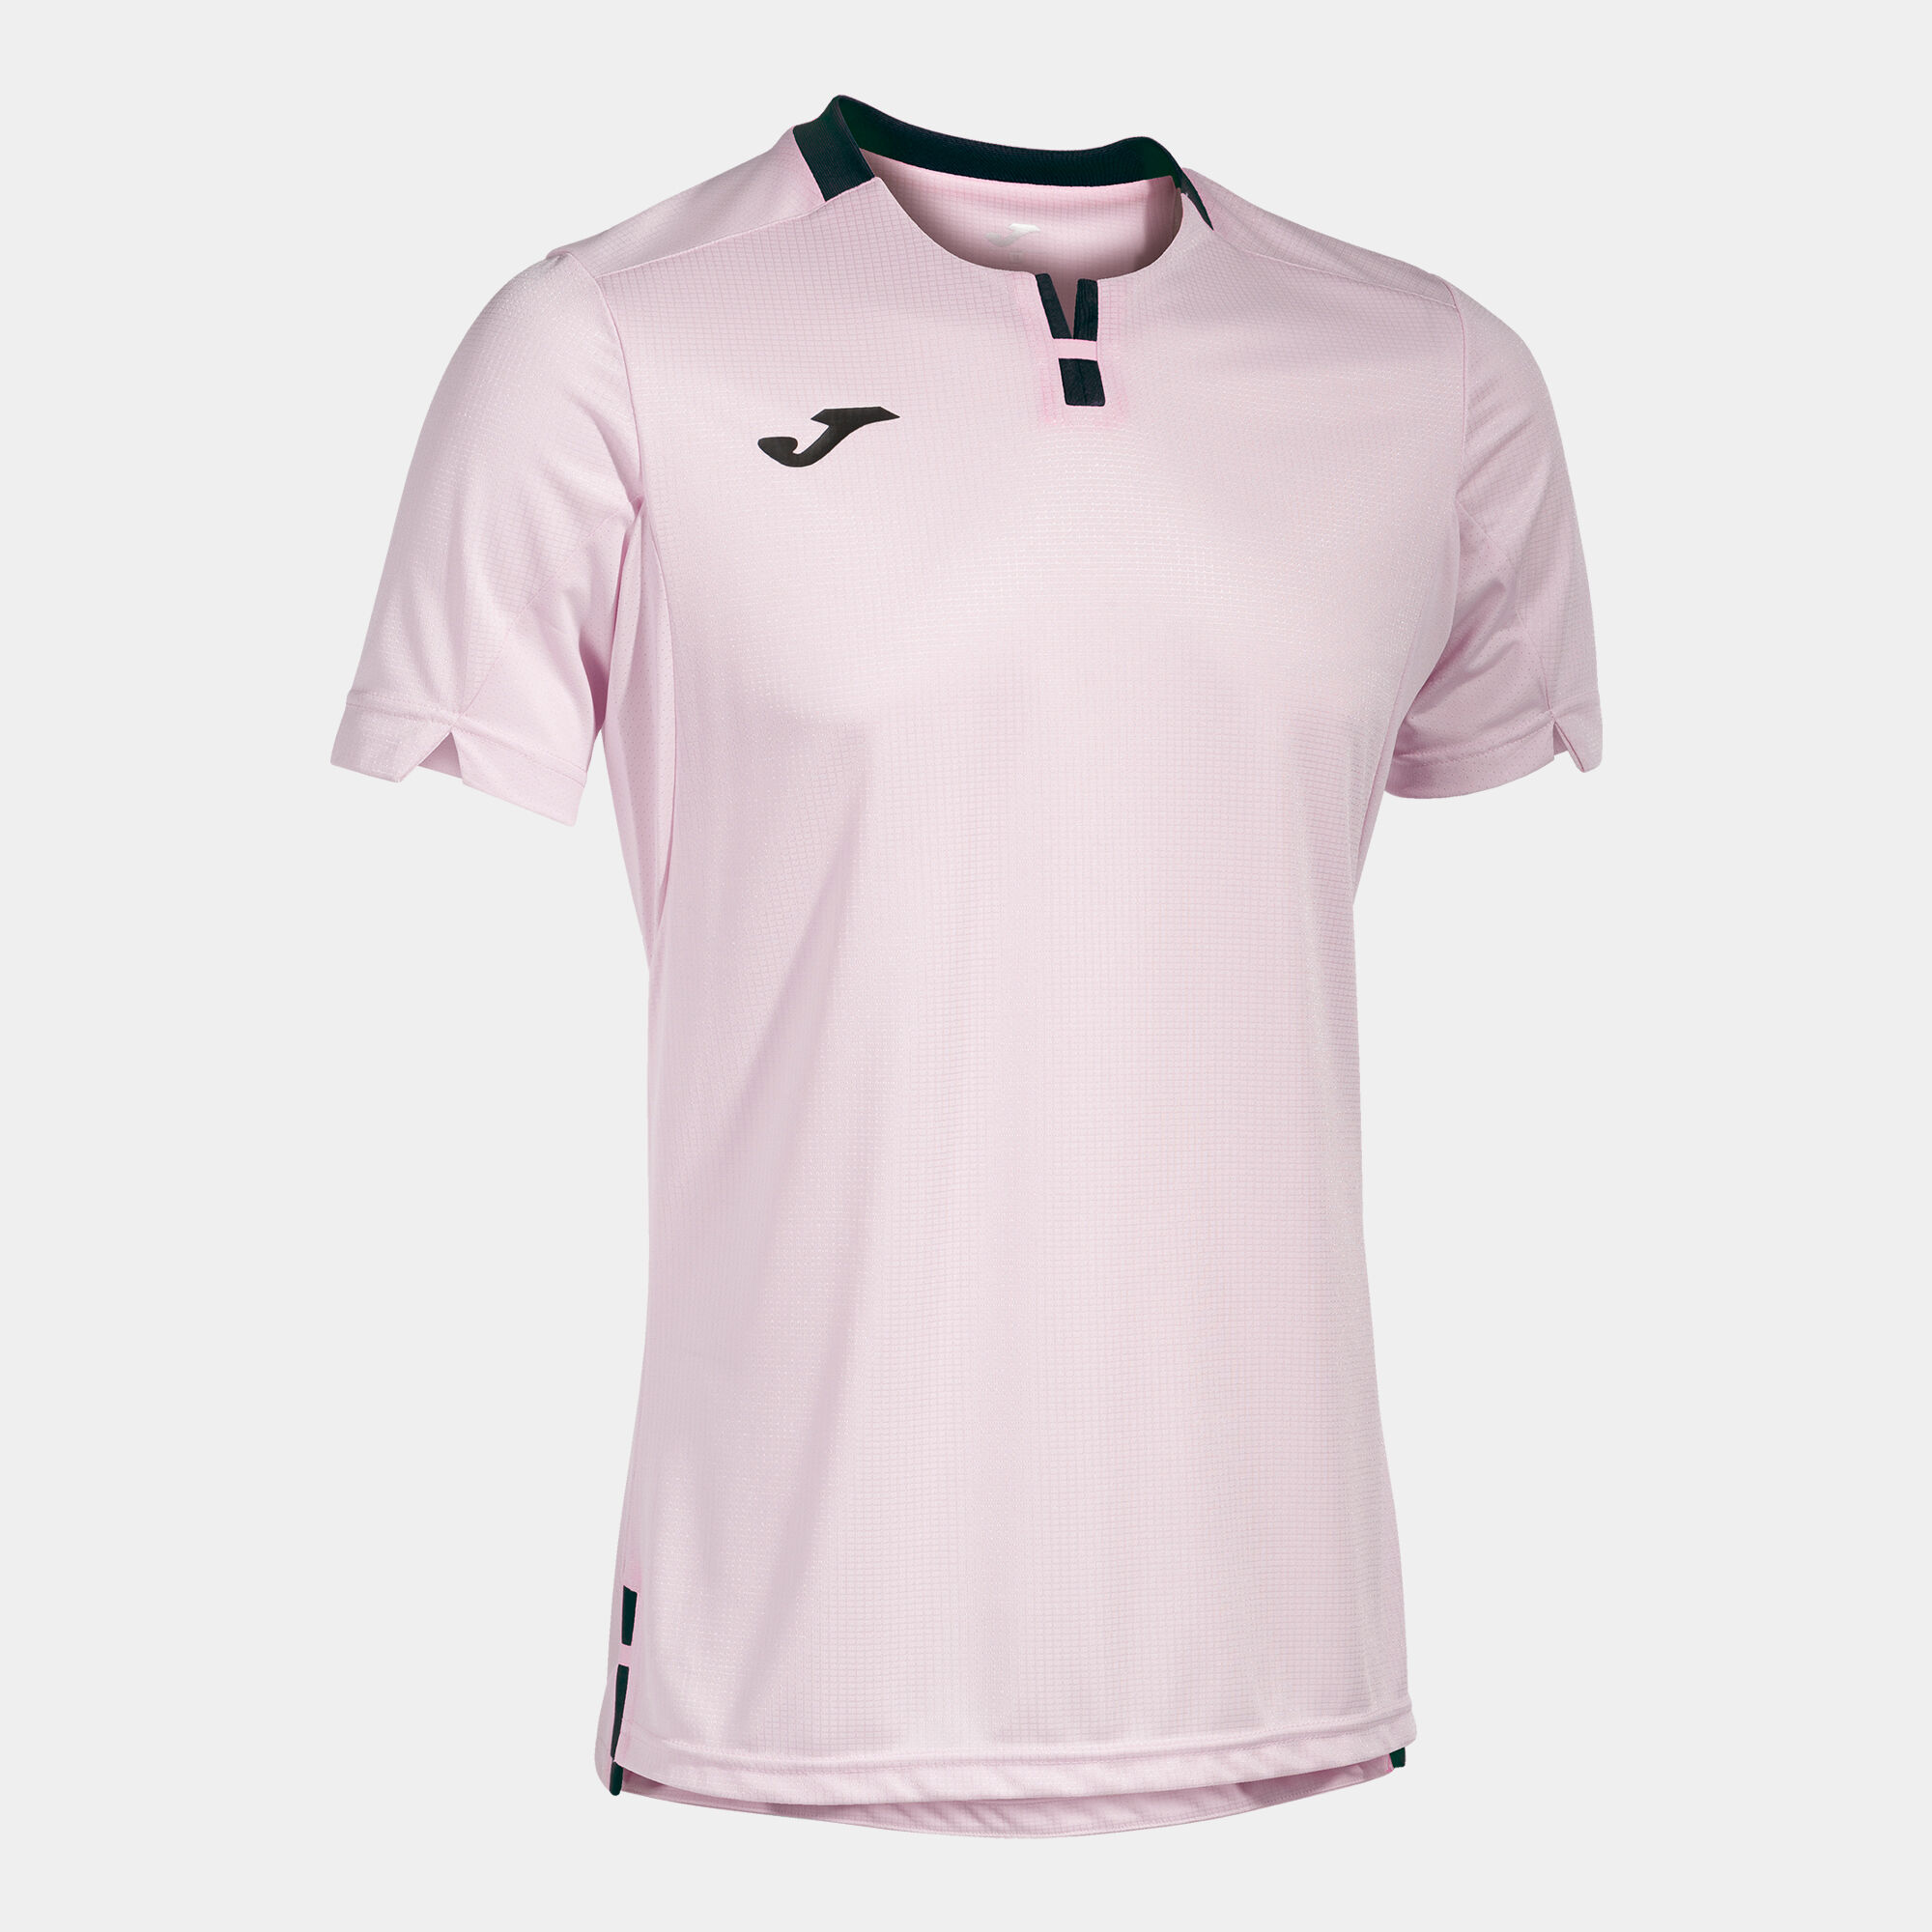 Maillot manches courtes homme Ranking rose